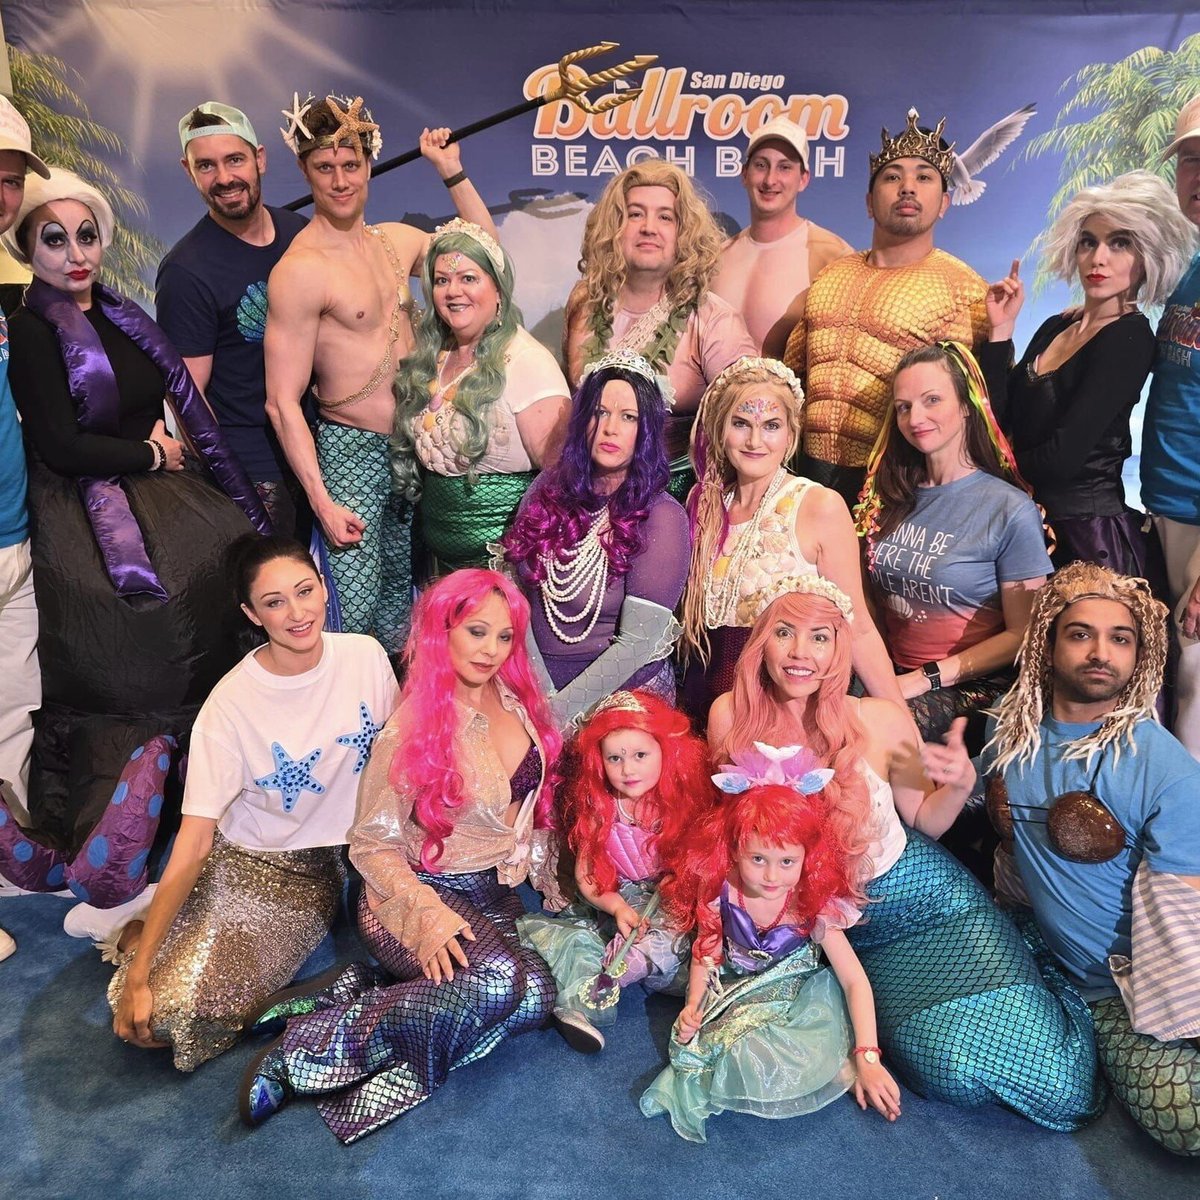 Mermaid-themed group picture